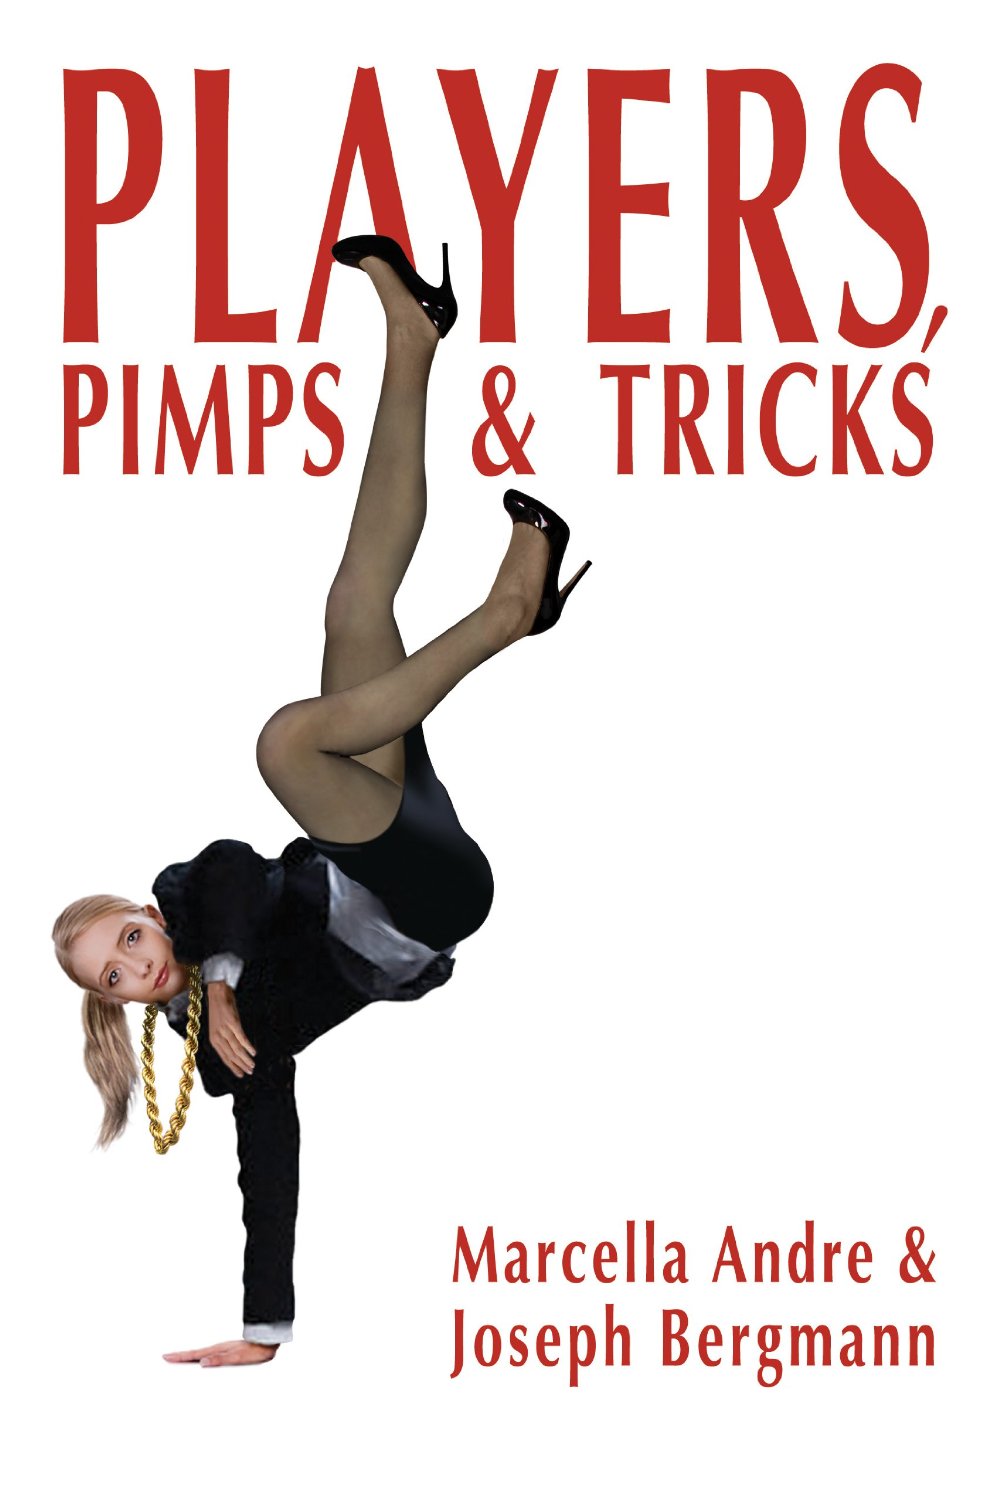 Players, Pimps & Tricks by Marcella Andre